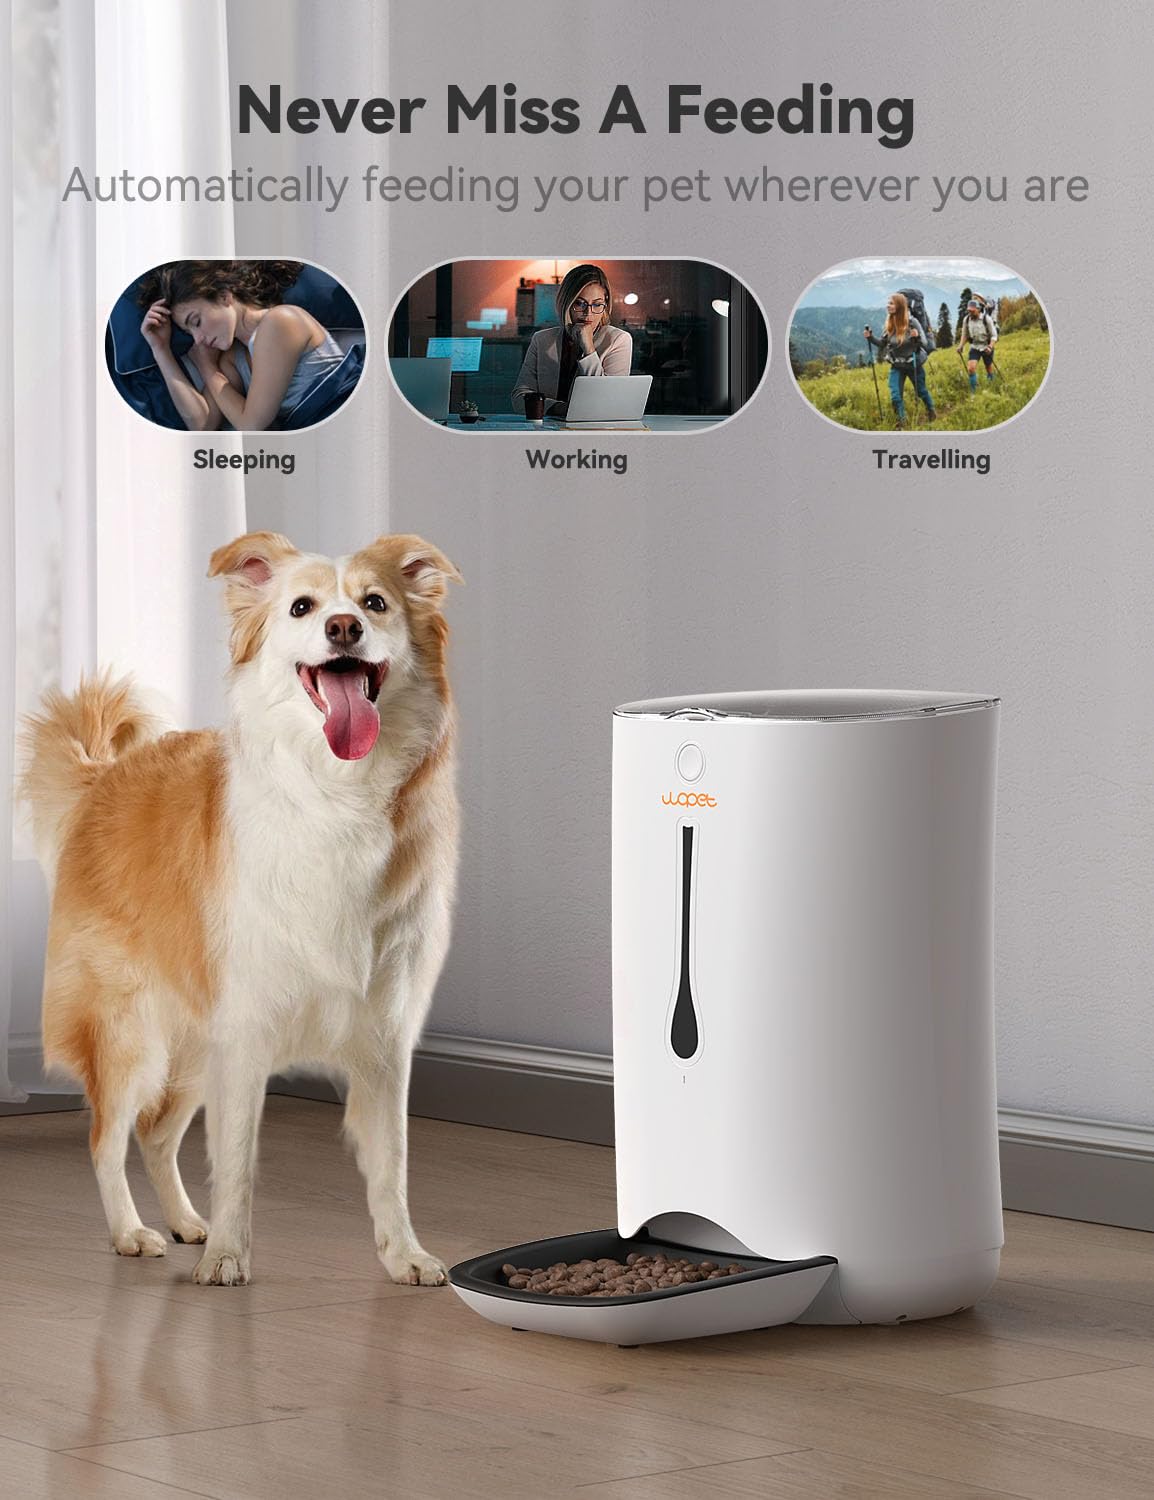 WOPET Automatic Dog Feeder, 7L Pet Food Dispenser for Cats and Dogs, Automatic Cat Feeders with Protion Control, Voice Recorder&Programmable Timer for up to 5 Meals Per Day